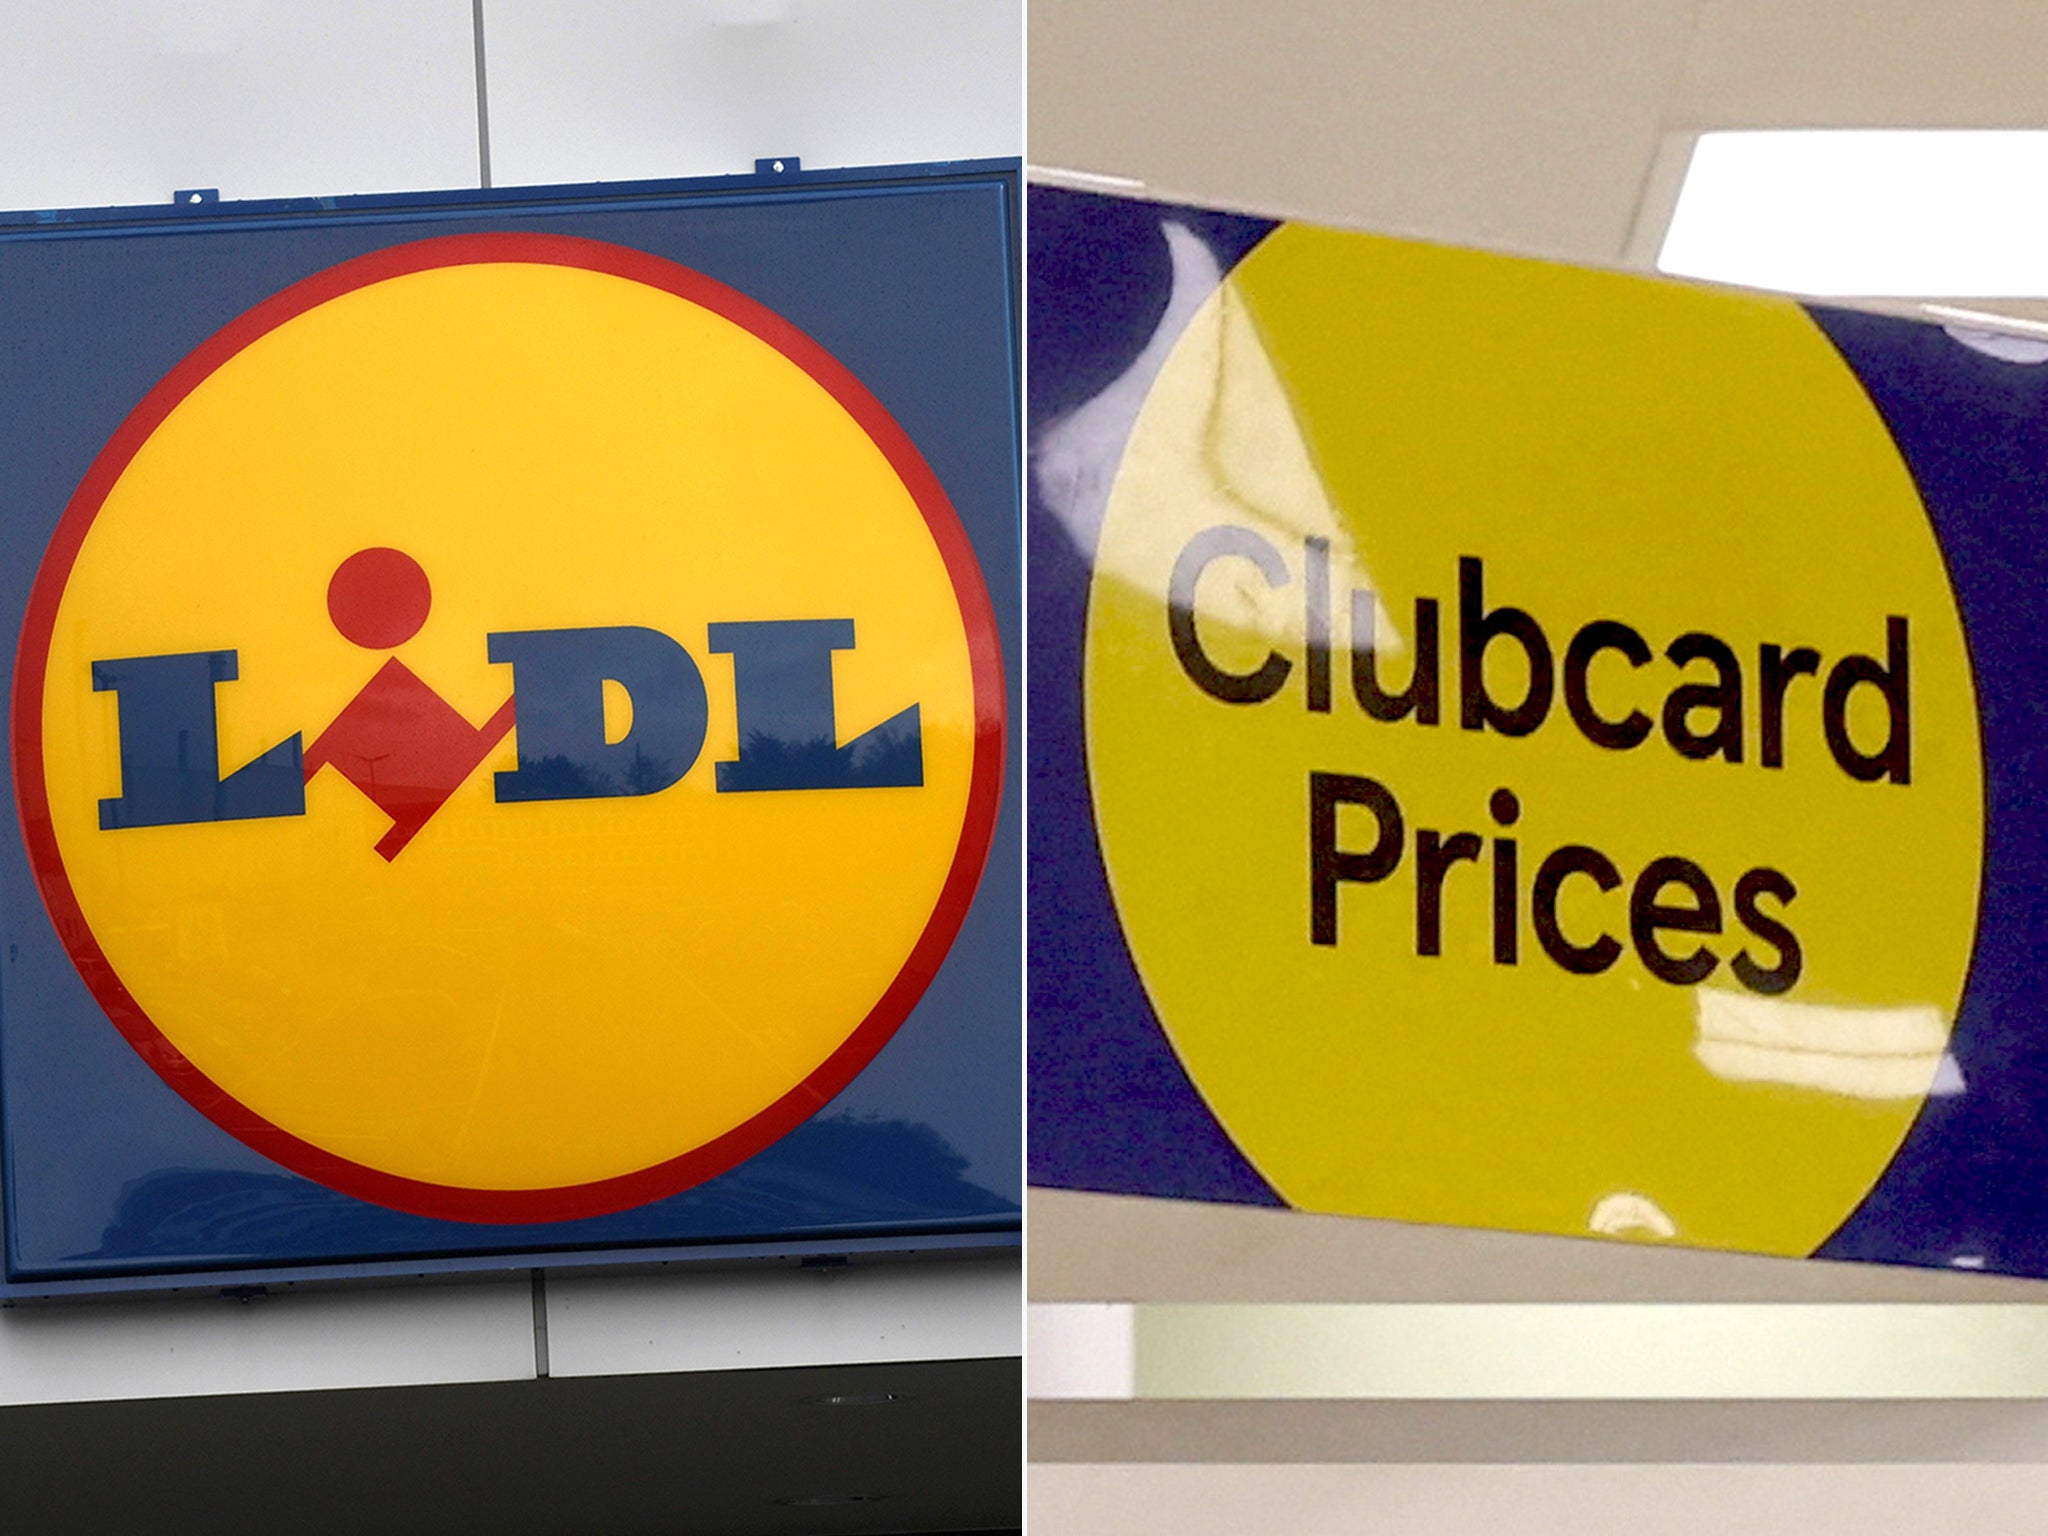 Lidl has been granted an injunction against Tesco due to the latter’s Clubcard Prices discount logo